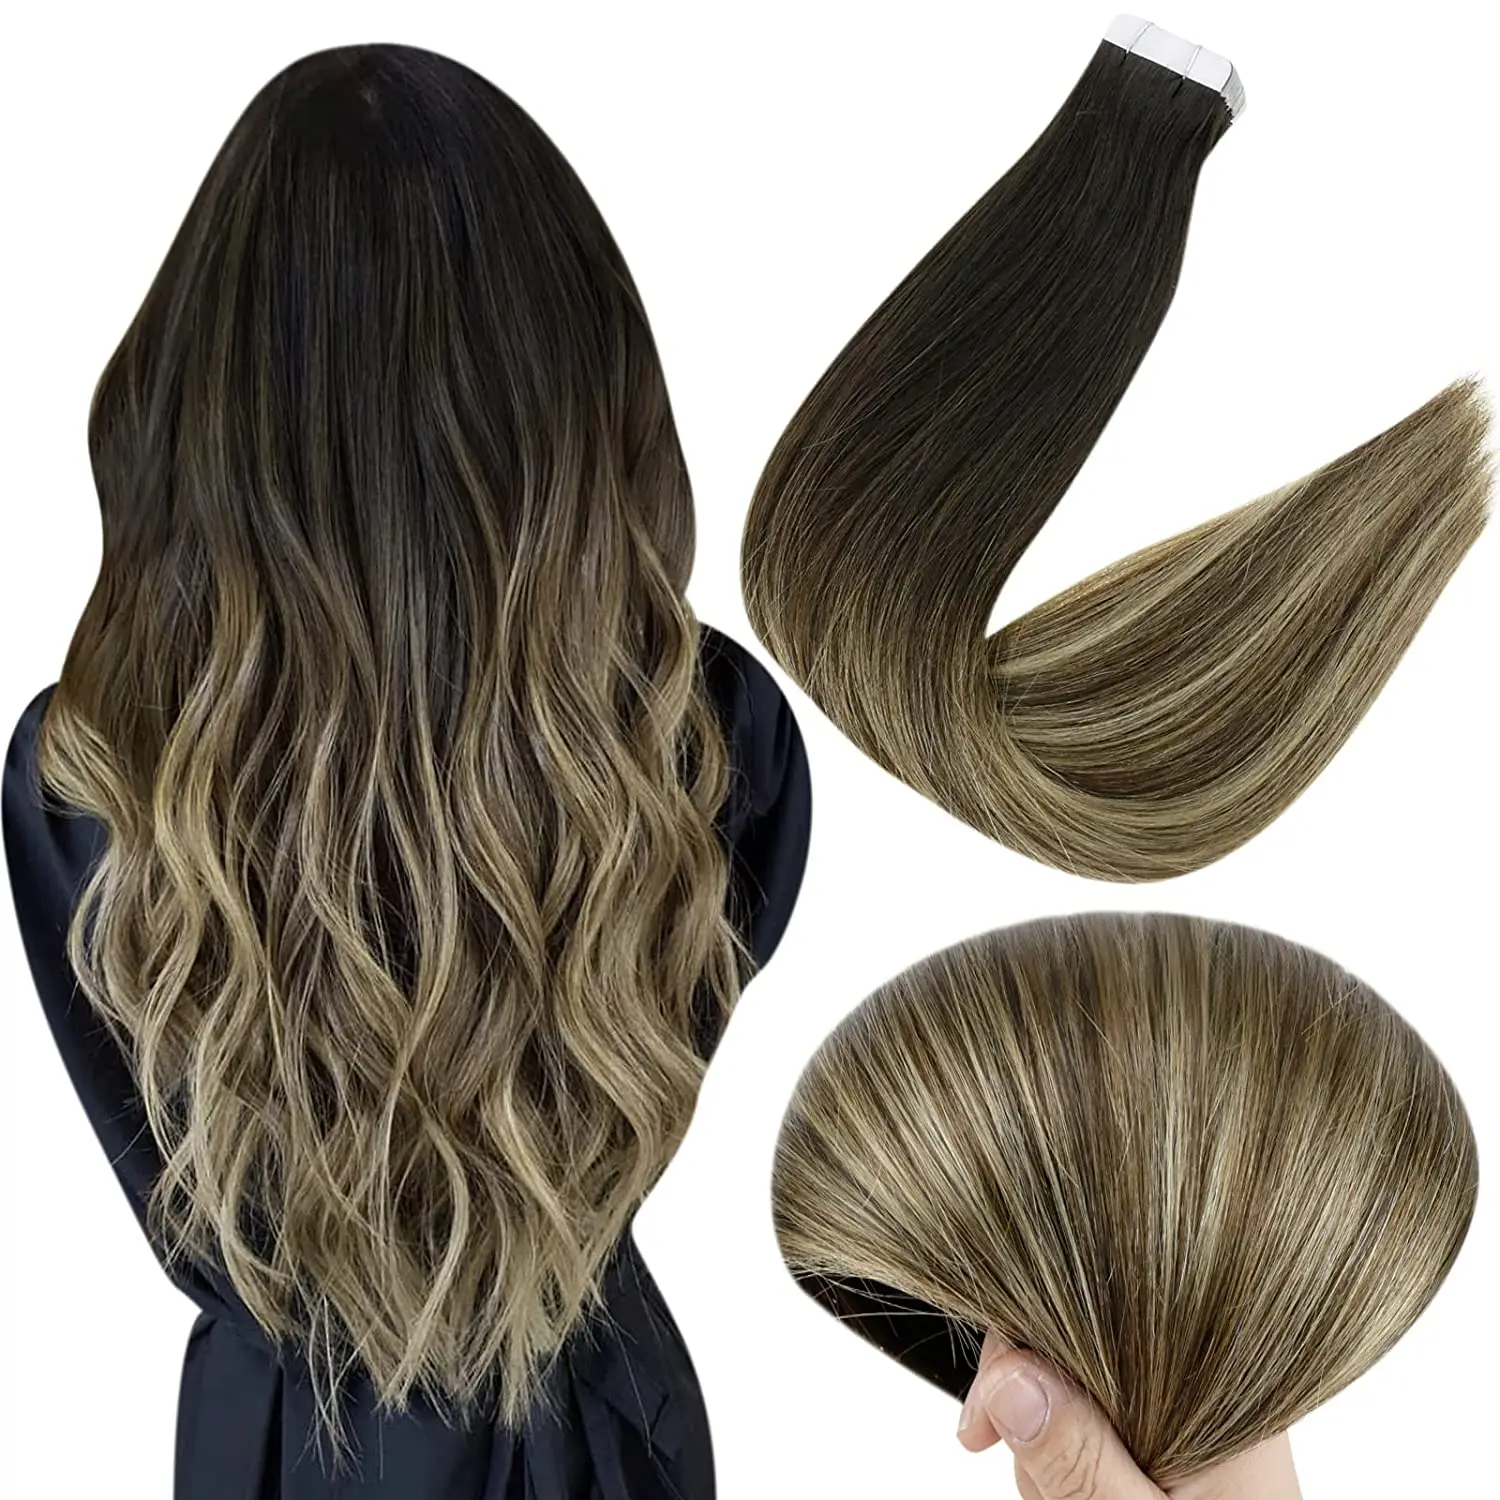 

Best Selling Full Shine Silky Straight Hair Extensions #1B/6/27 Black to Caramel Blonde Tape in Remy Human Hair 20Pieces 50g